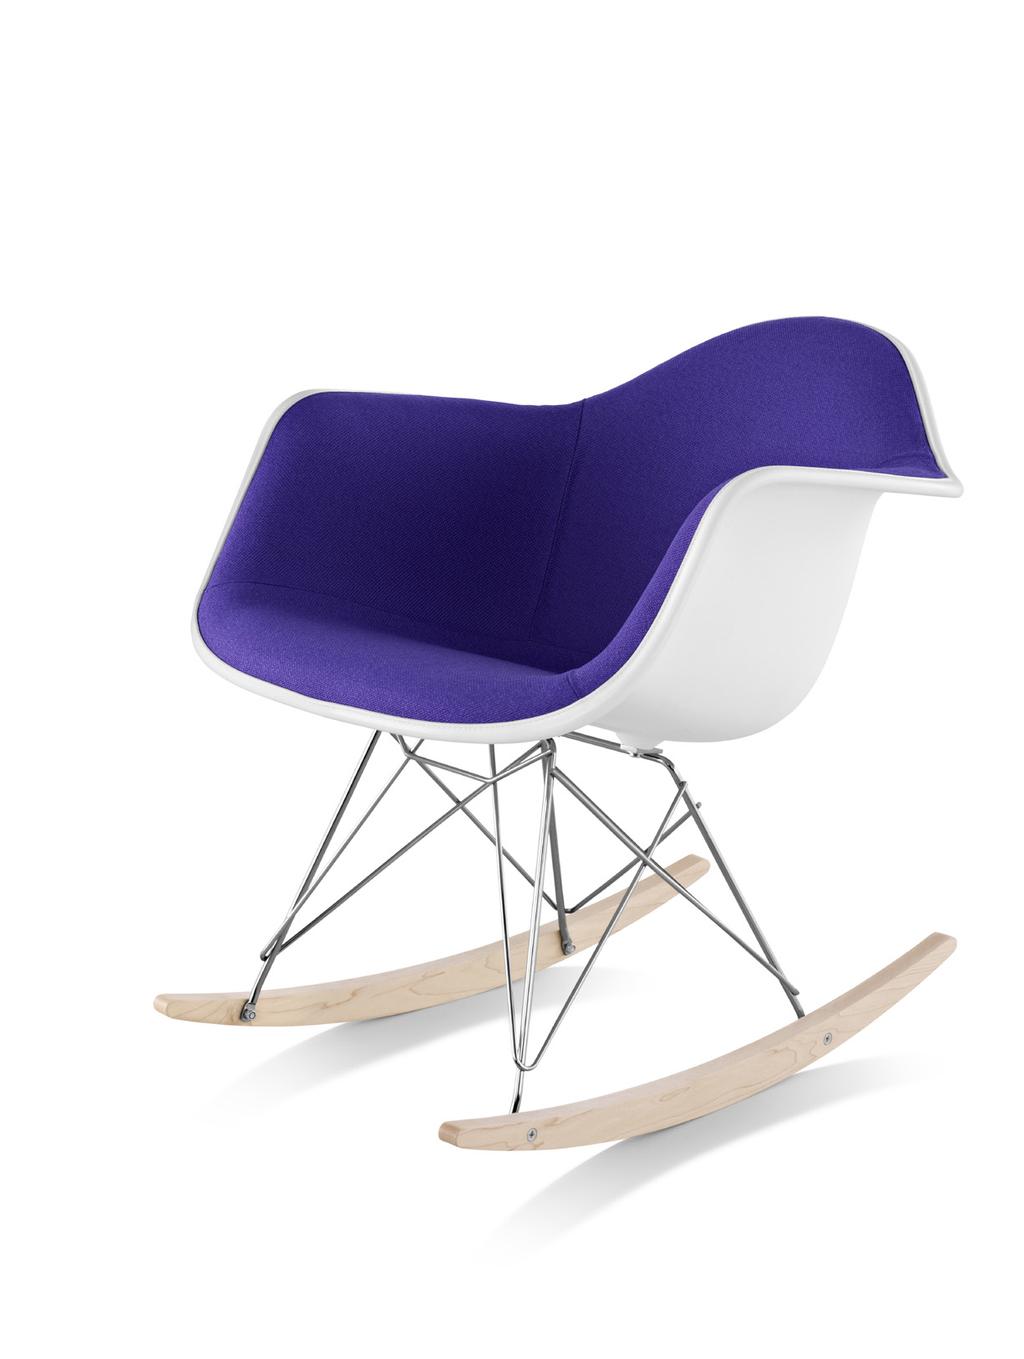 Eames Upholstered Molded Plastic Armchair Rocker Base 13% recycled content; 86% recyclable Charles Eames said The role of the designer is that of a very good, thoughtful host anticipating the needs